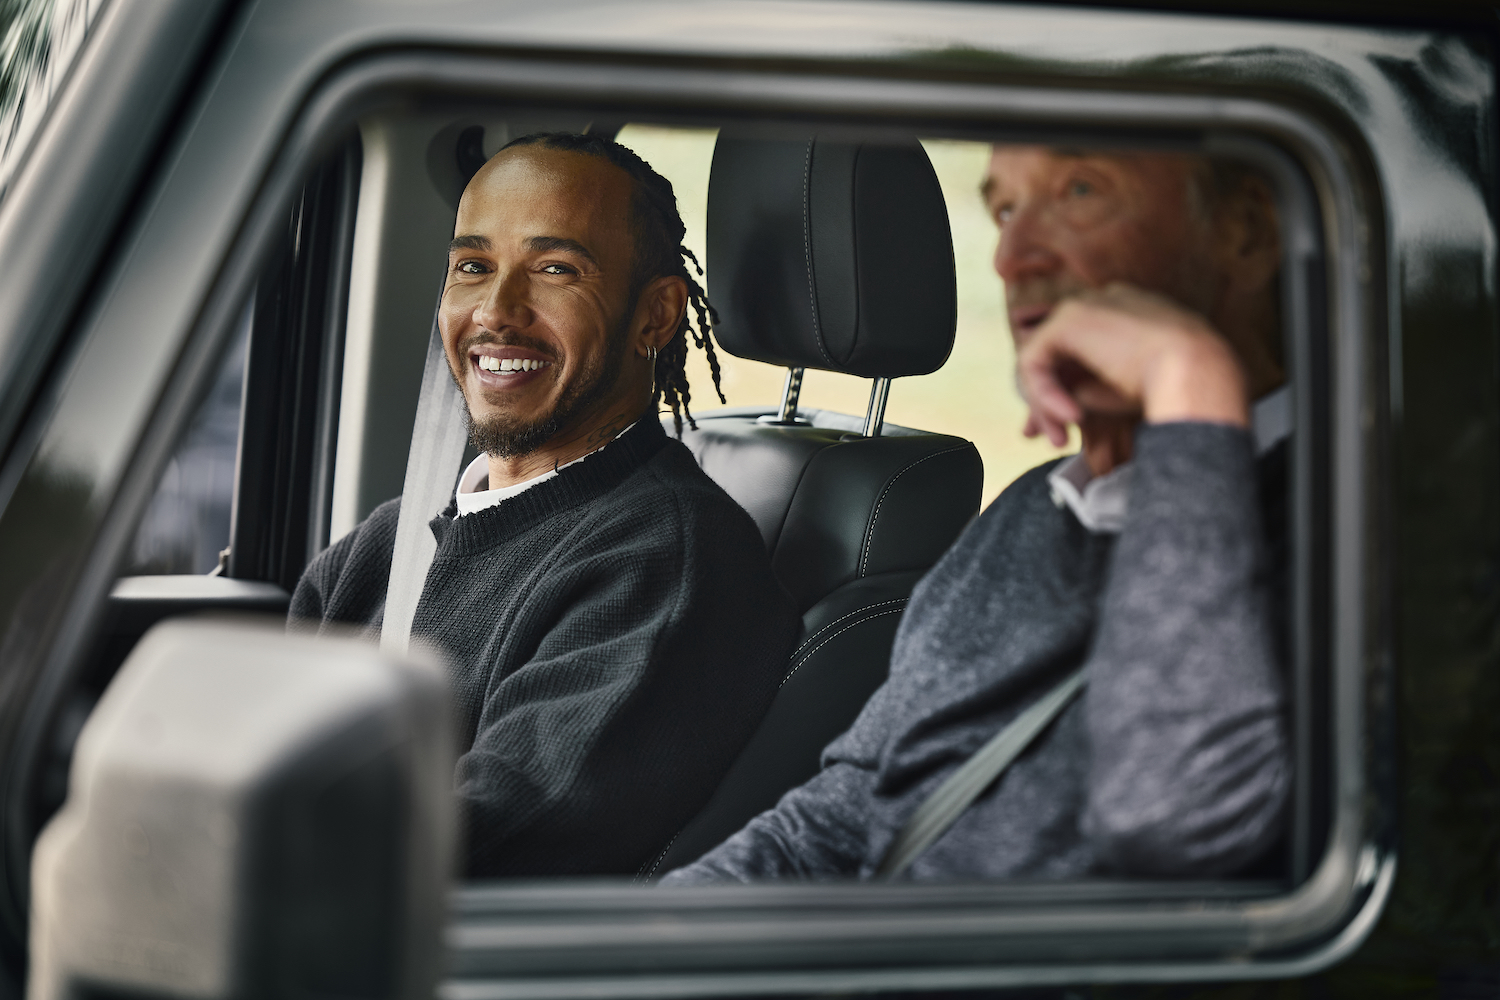 Lewis Hamilton Test Drives The SUV Everyone Will Want In 2023